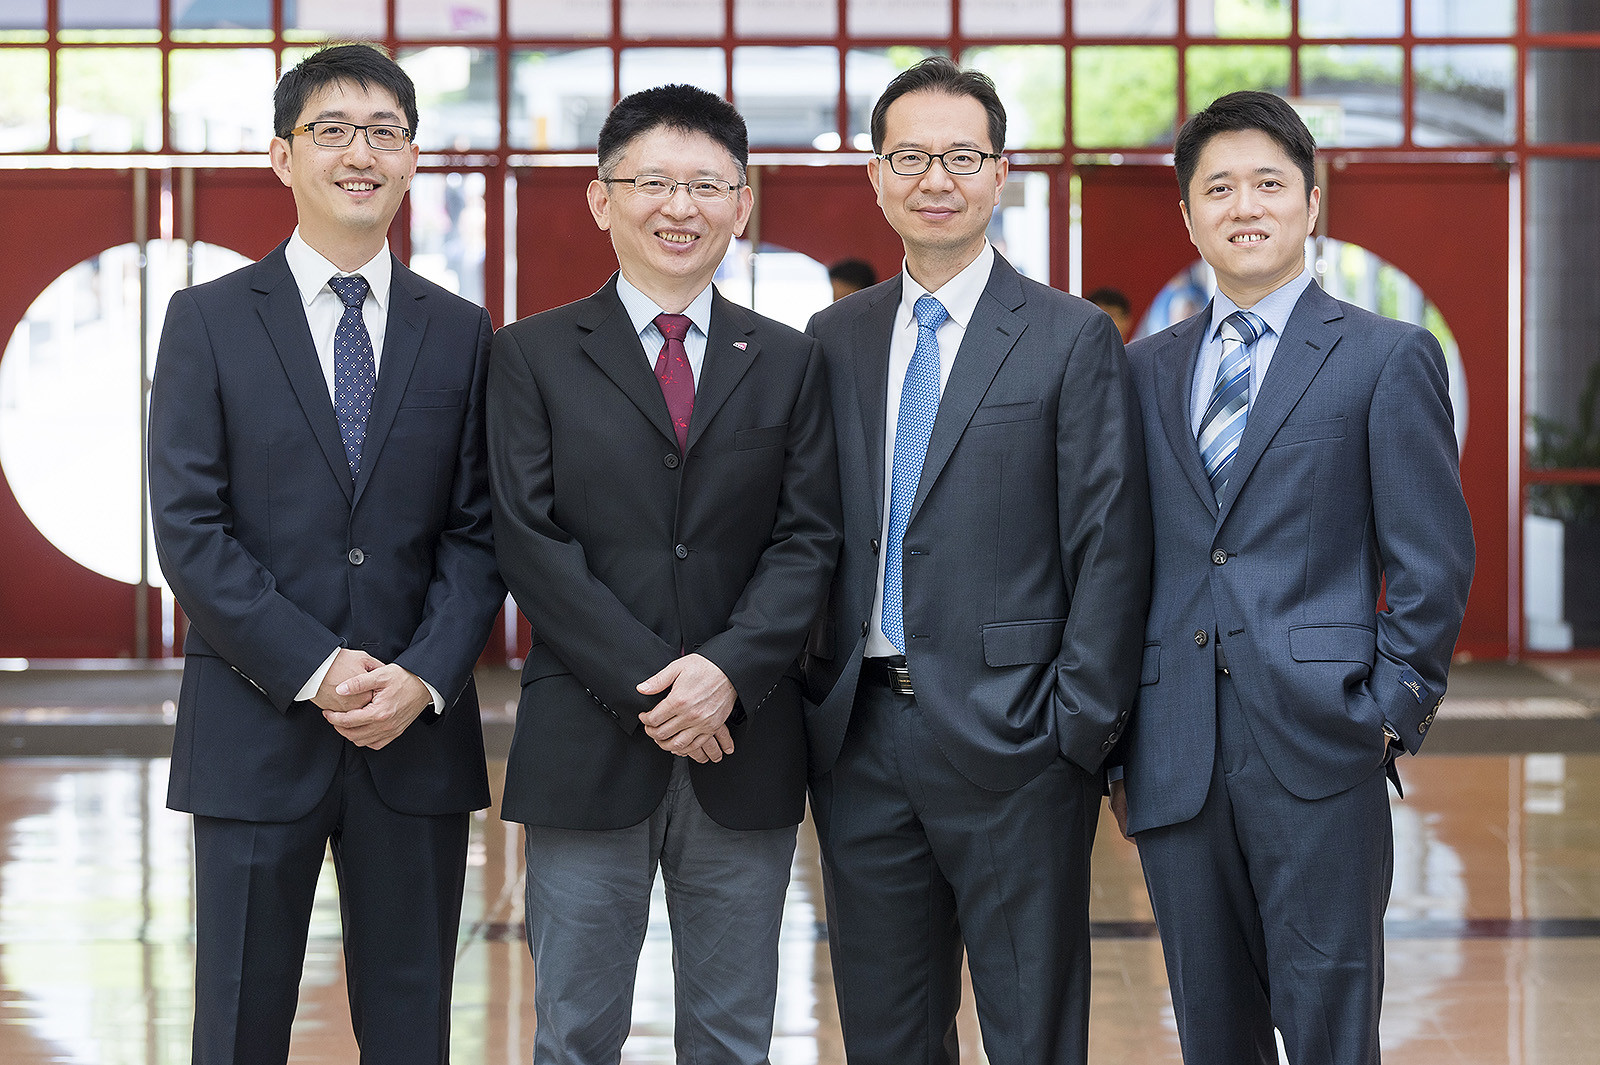 Professor Feng and Professor Kim (2nd and 3rd from left) have been awarded Outstanding Research Awards while Dr Lu (far right) and Dr Wang (far left) have been awarded Outstanding Research Awards for Junior Faculty.